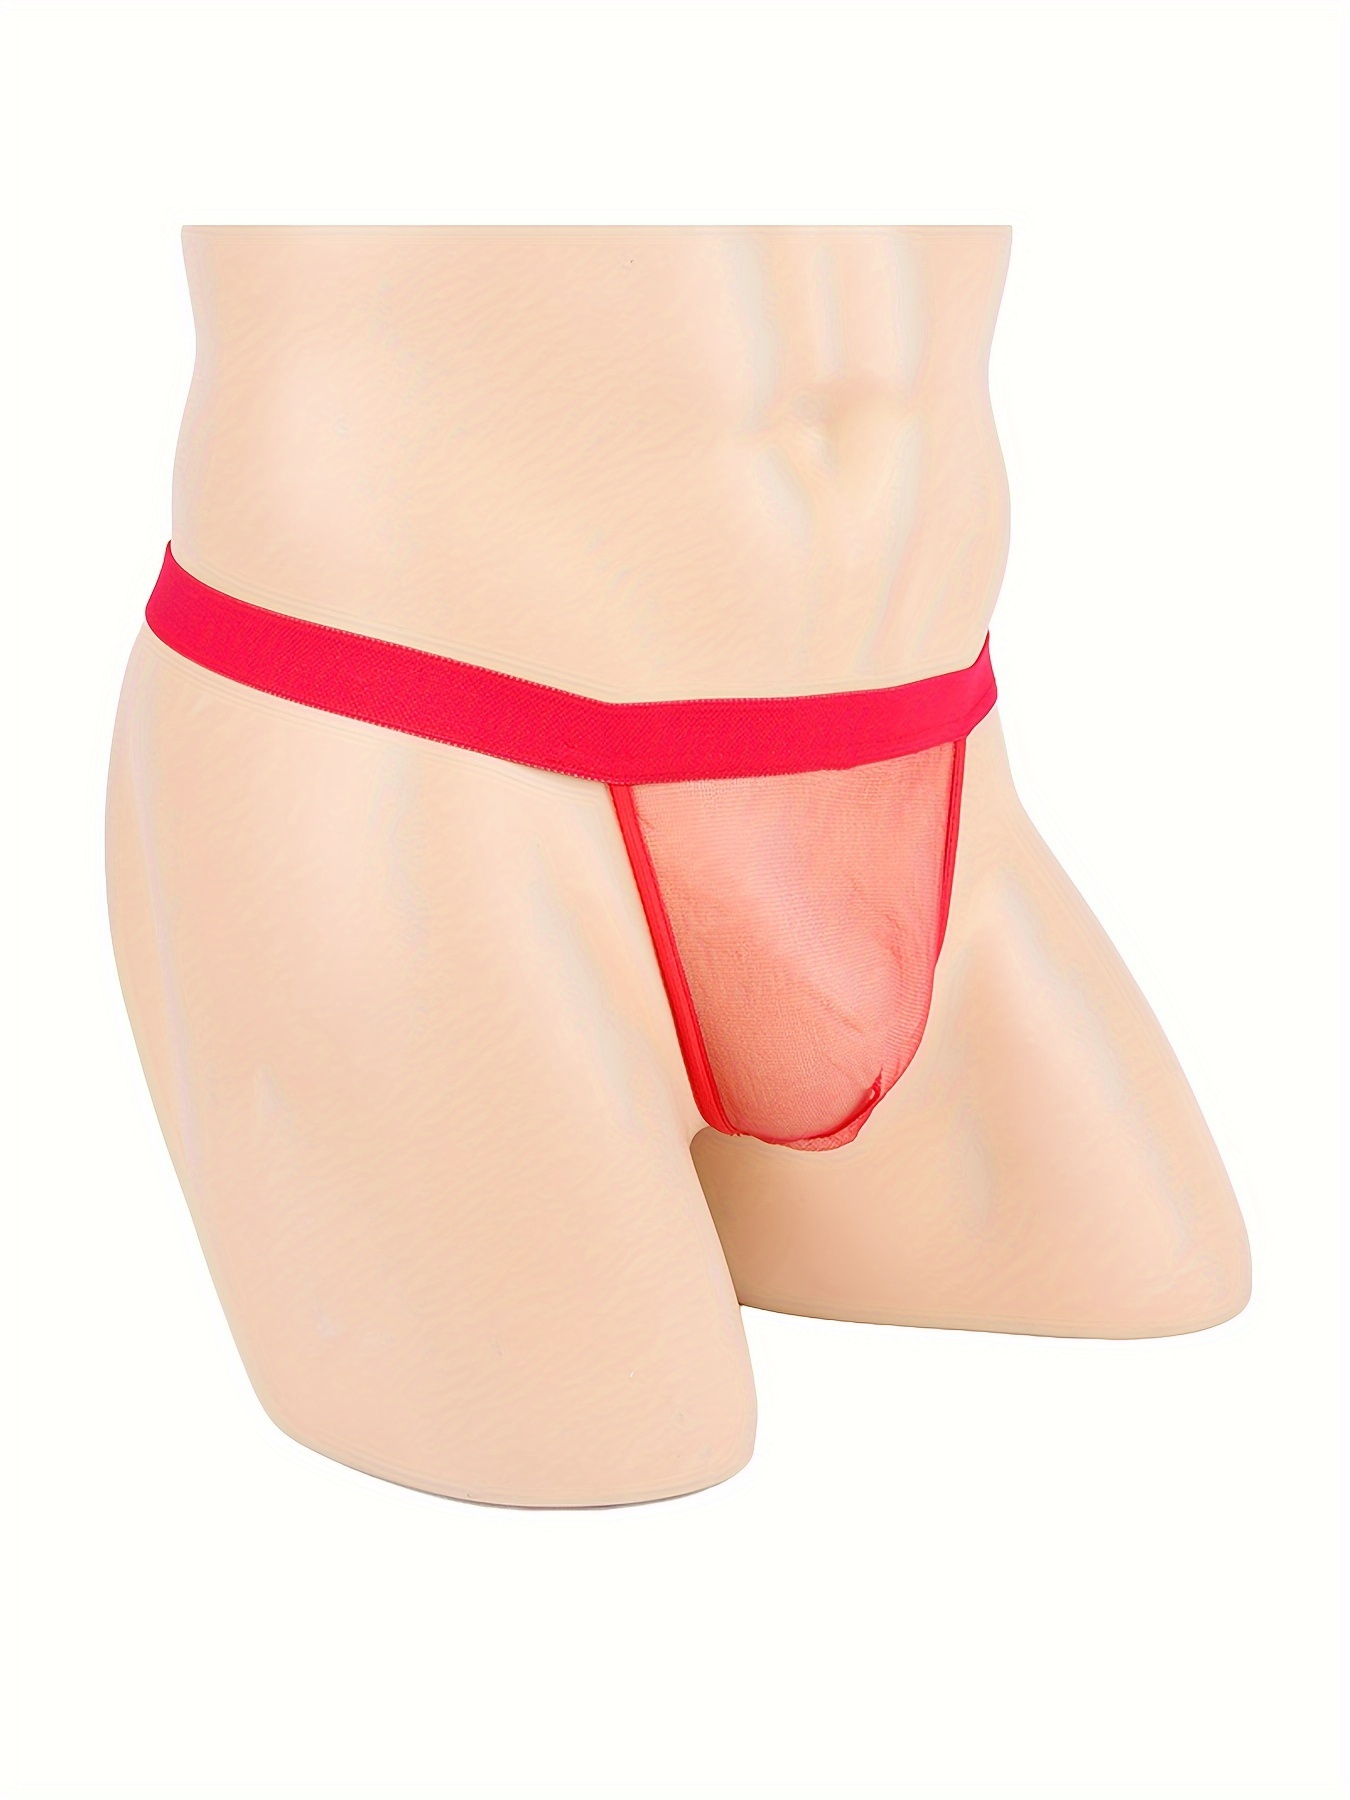 What are the benefit of wearing see-through underwear? - CoverMale